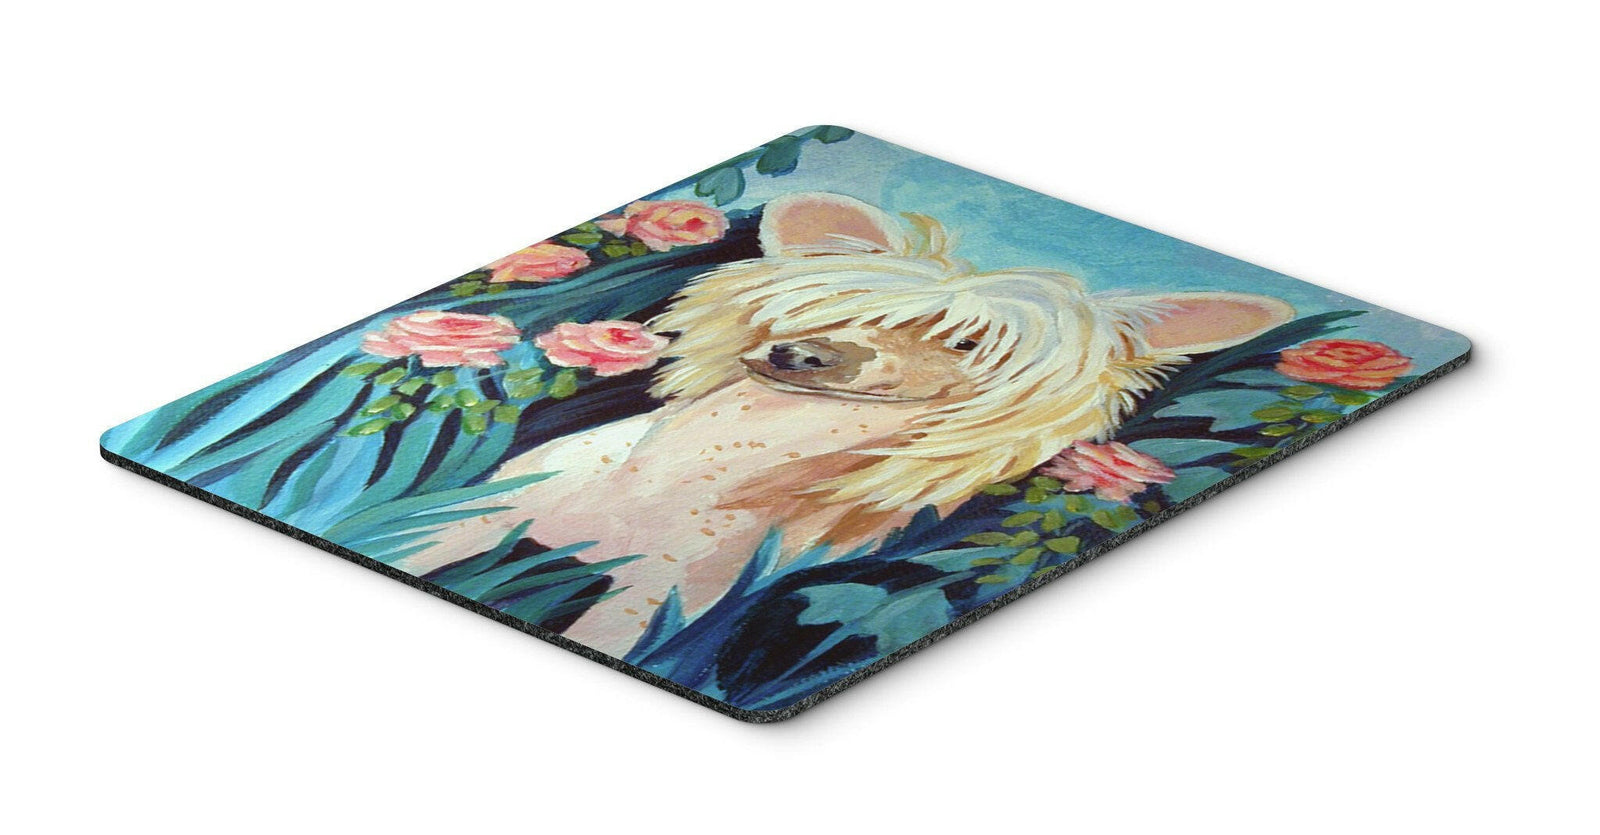 Chinese Crested Mouse Pad, Hot Pad or Trivet by Caroline's Treasures